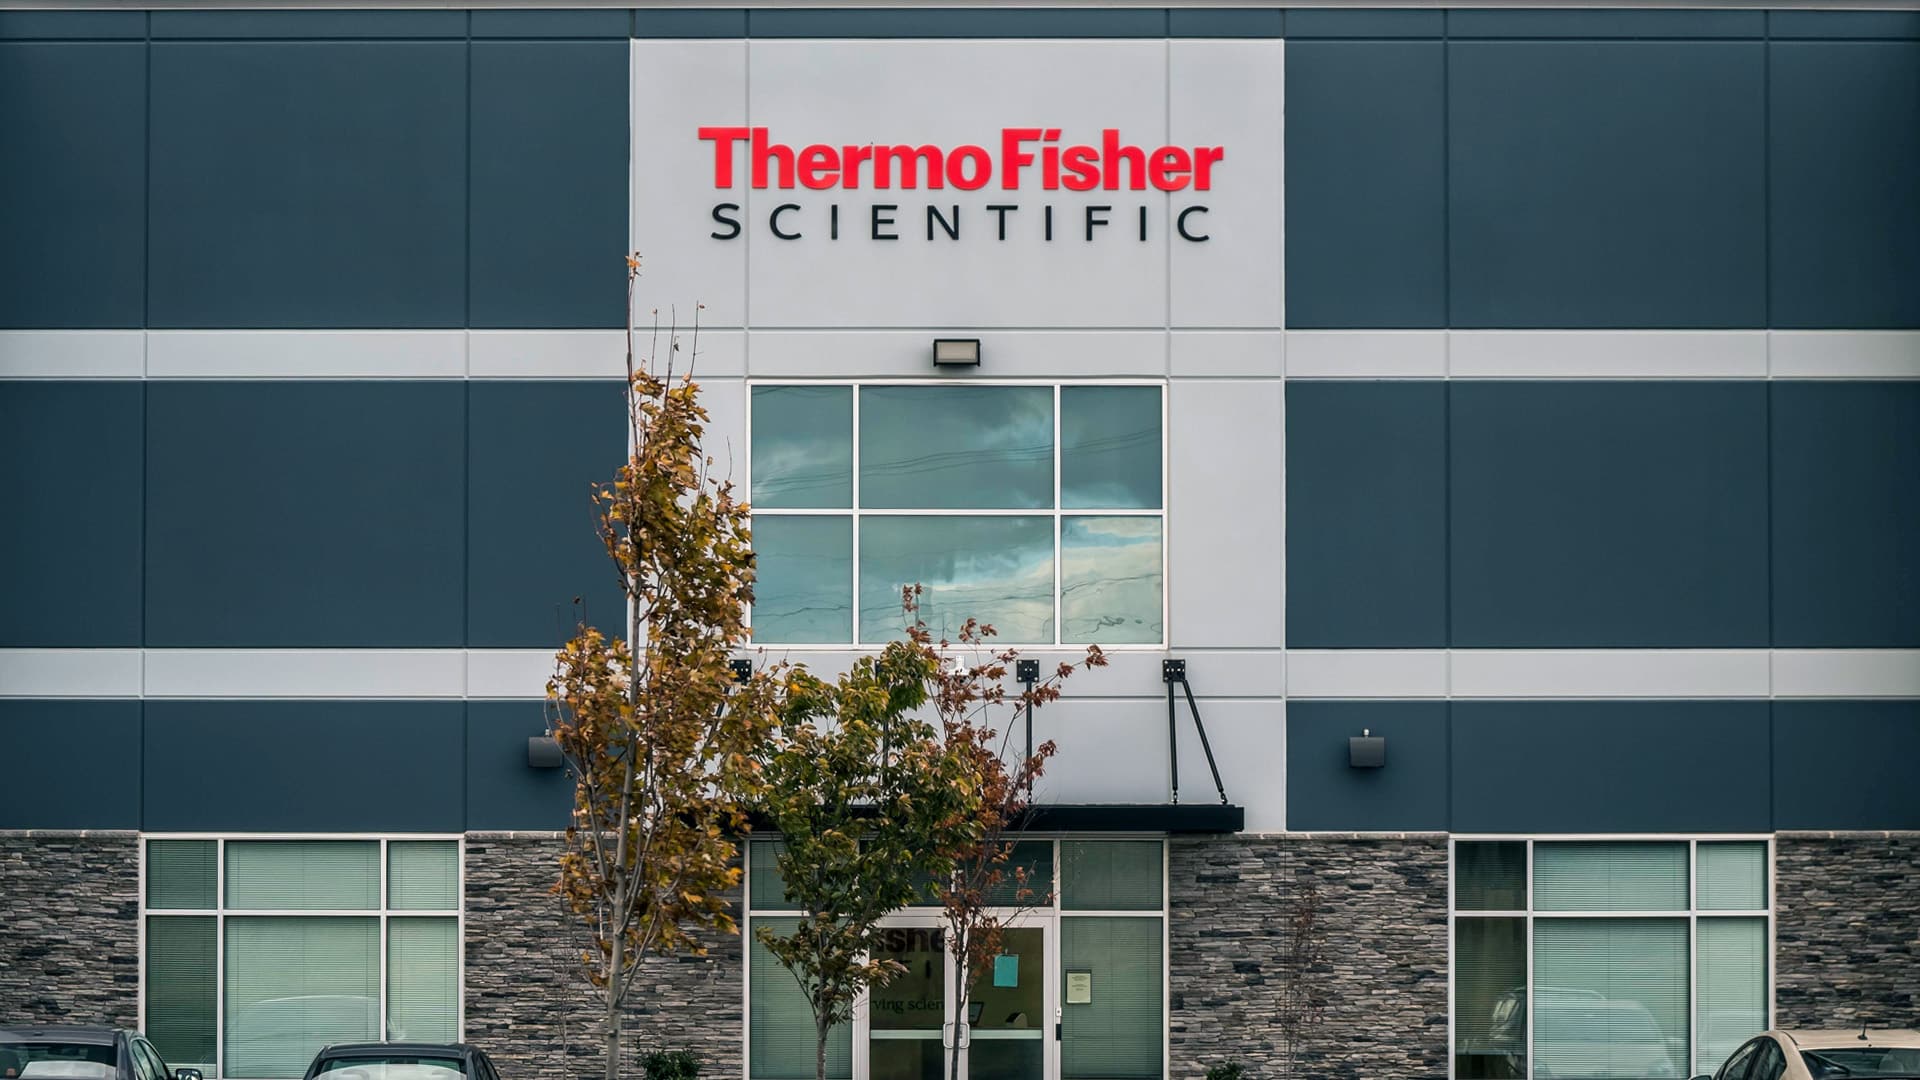 Thermo Fisher Scientific pledges Rs 67 crore support for India Covid relief